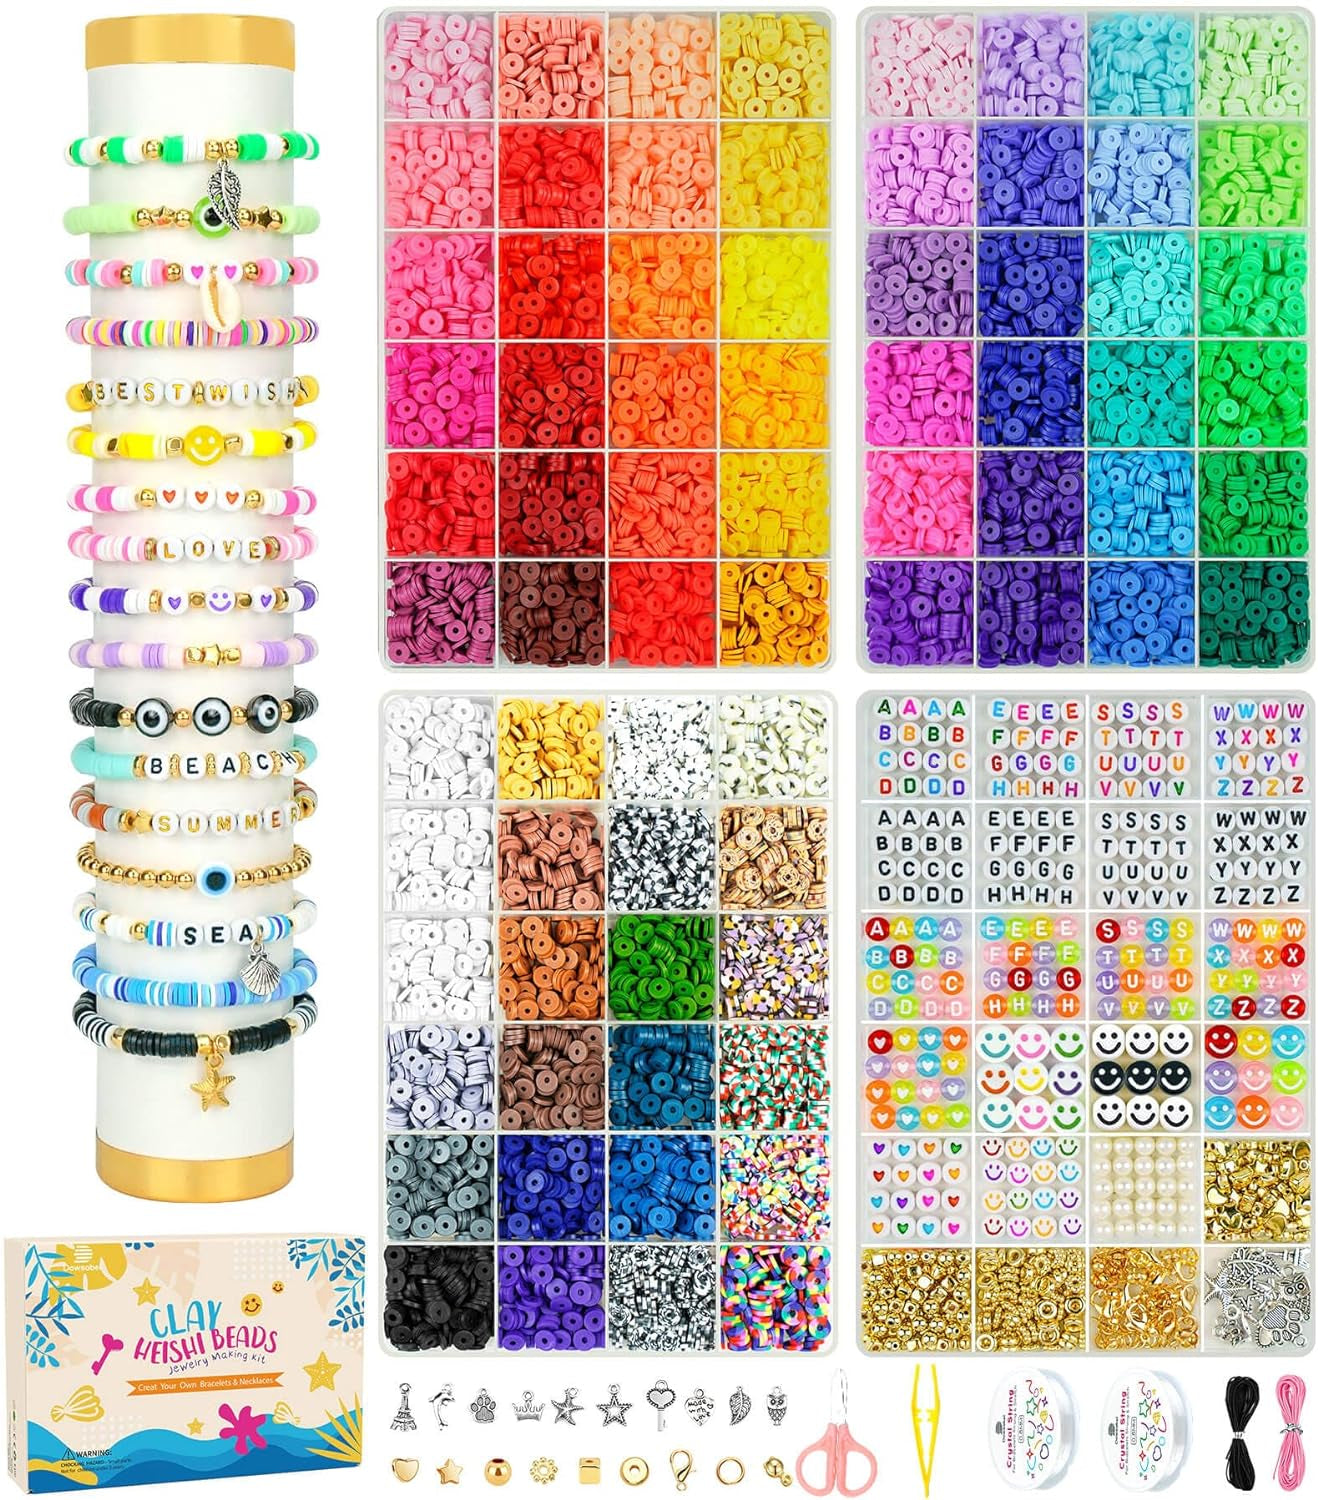 Clay Beads Bracelet Making Kit for Beginner, 5000 Pcs Preppy Polymer Clay Beads with Charms Kit for Jewelry Making, DIY Arts and Crafts Birthday Gifts Toys for Kids Age 6-13